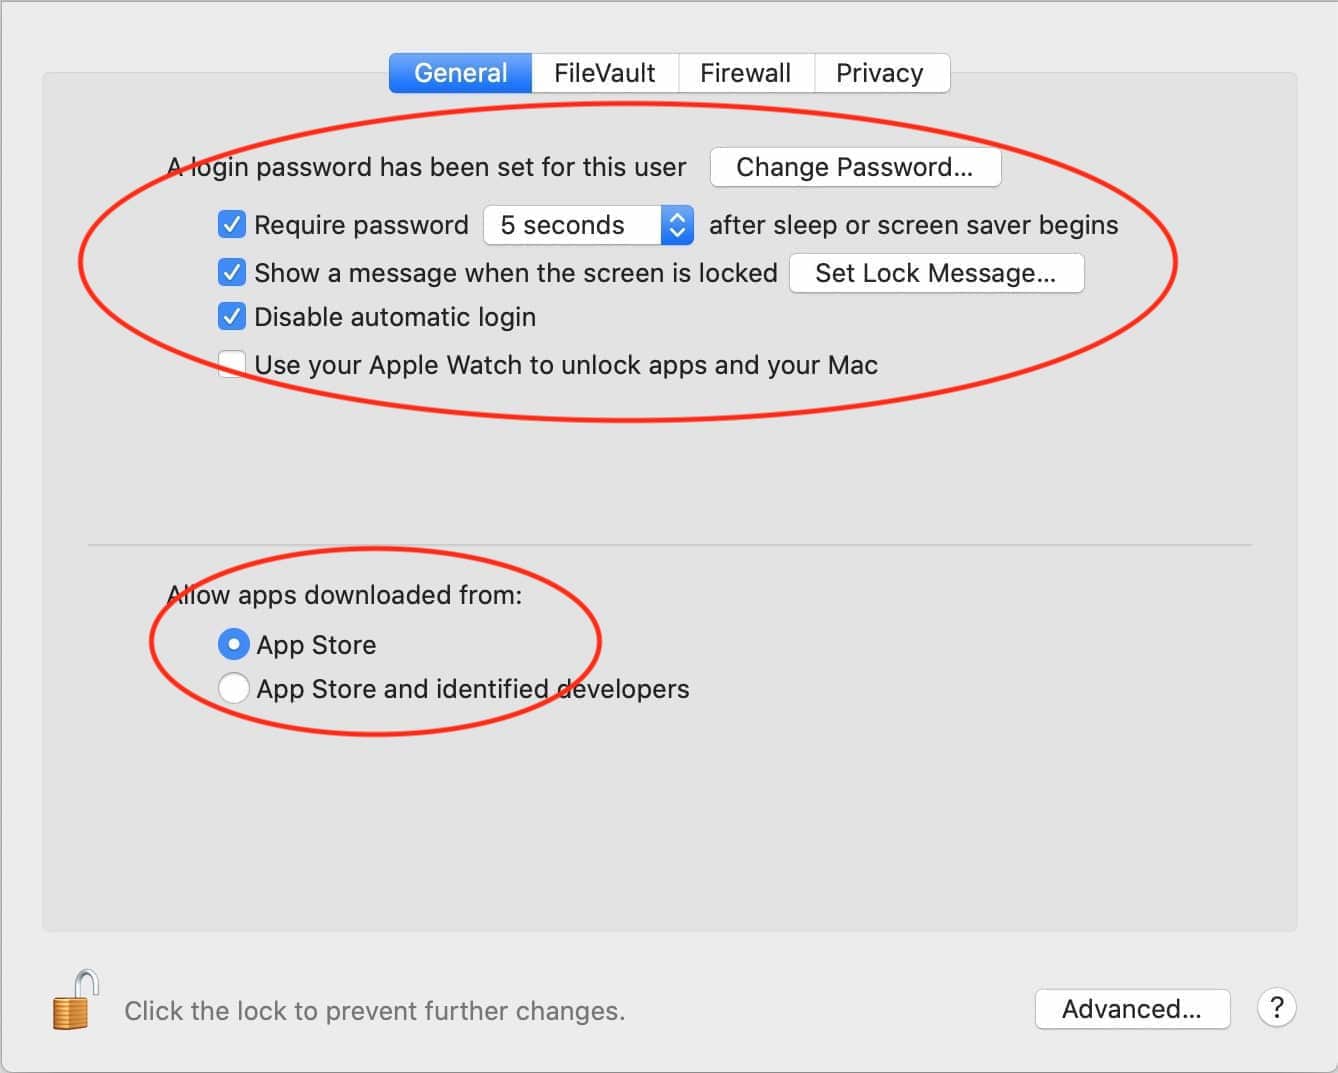 Set your general preferences as shown. If you have an Apple Watch, you can also check the box for allowing your Apple Watch to unlock your Mac.